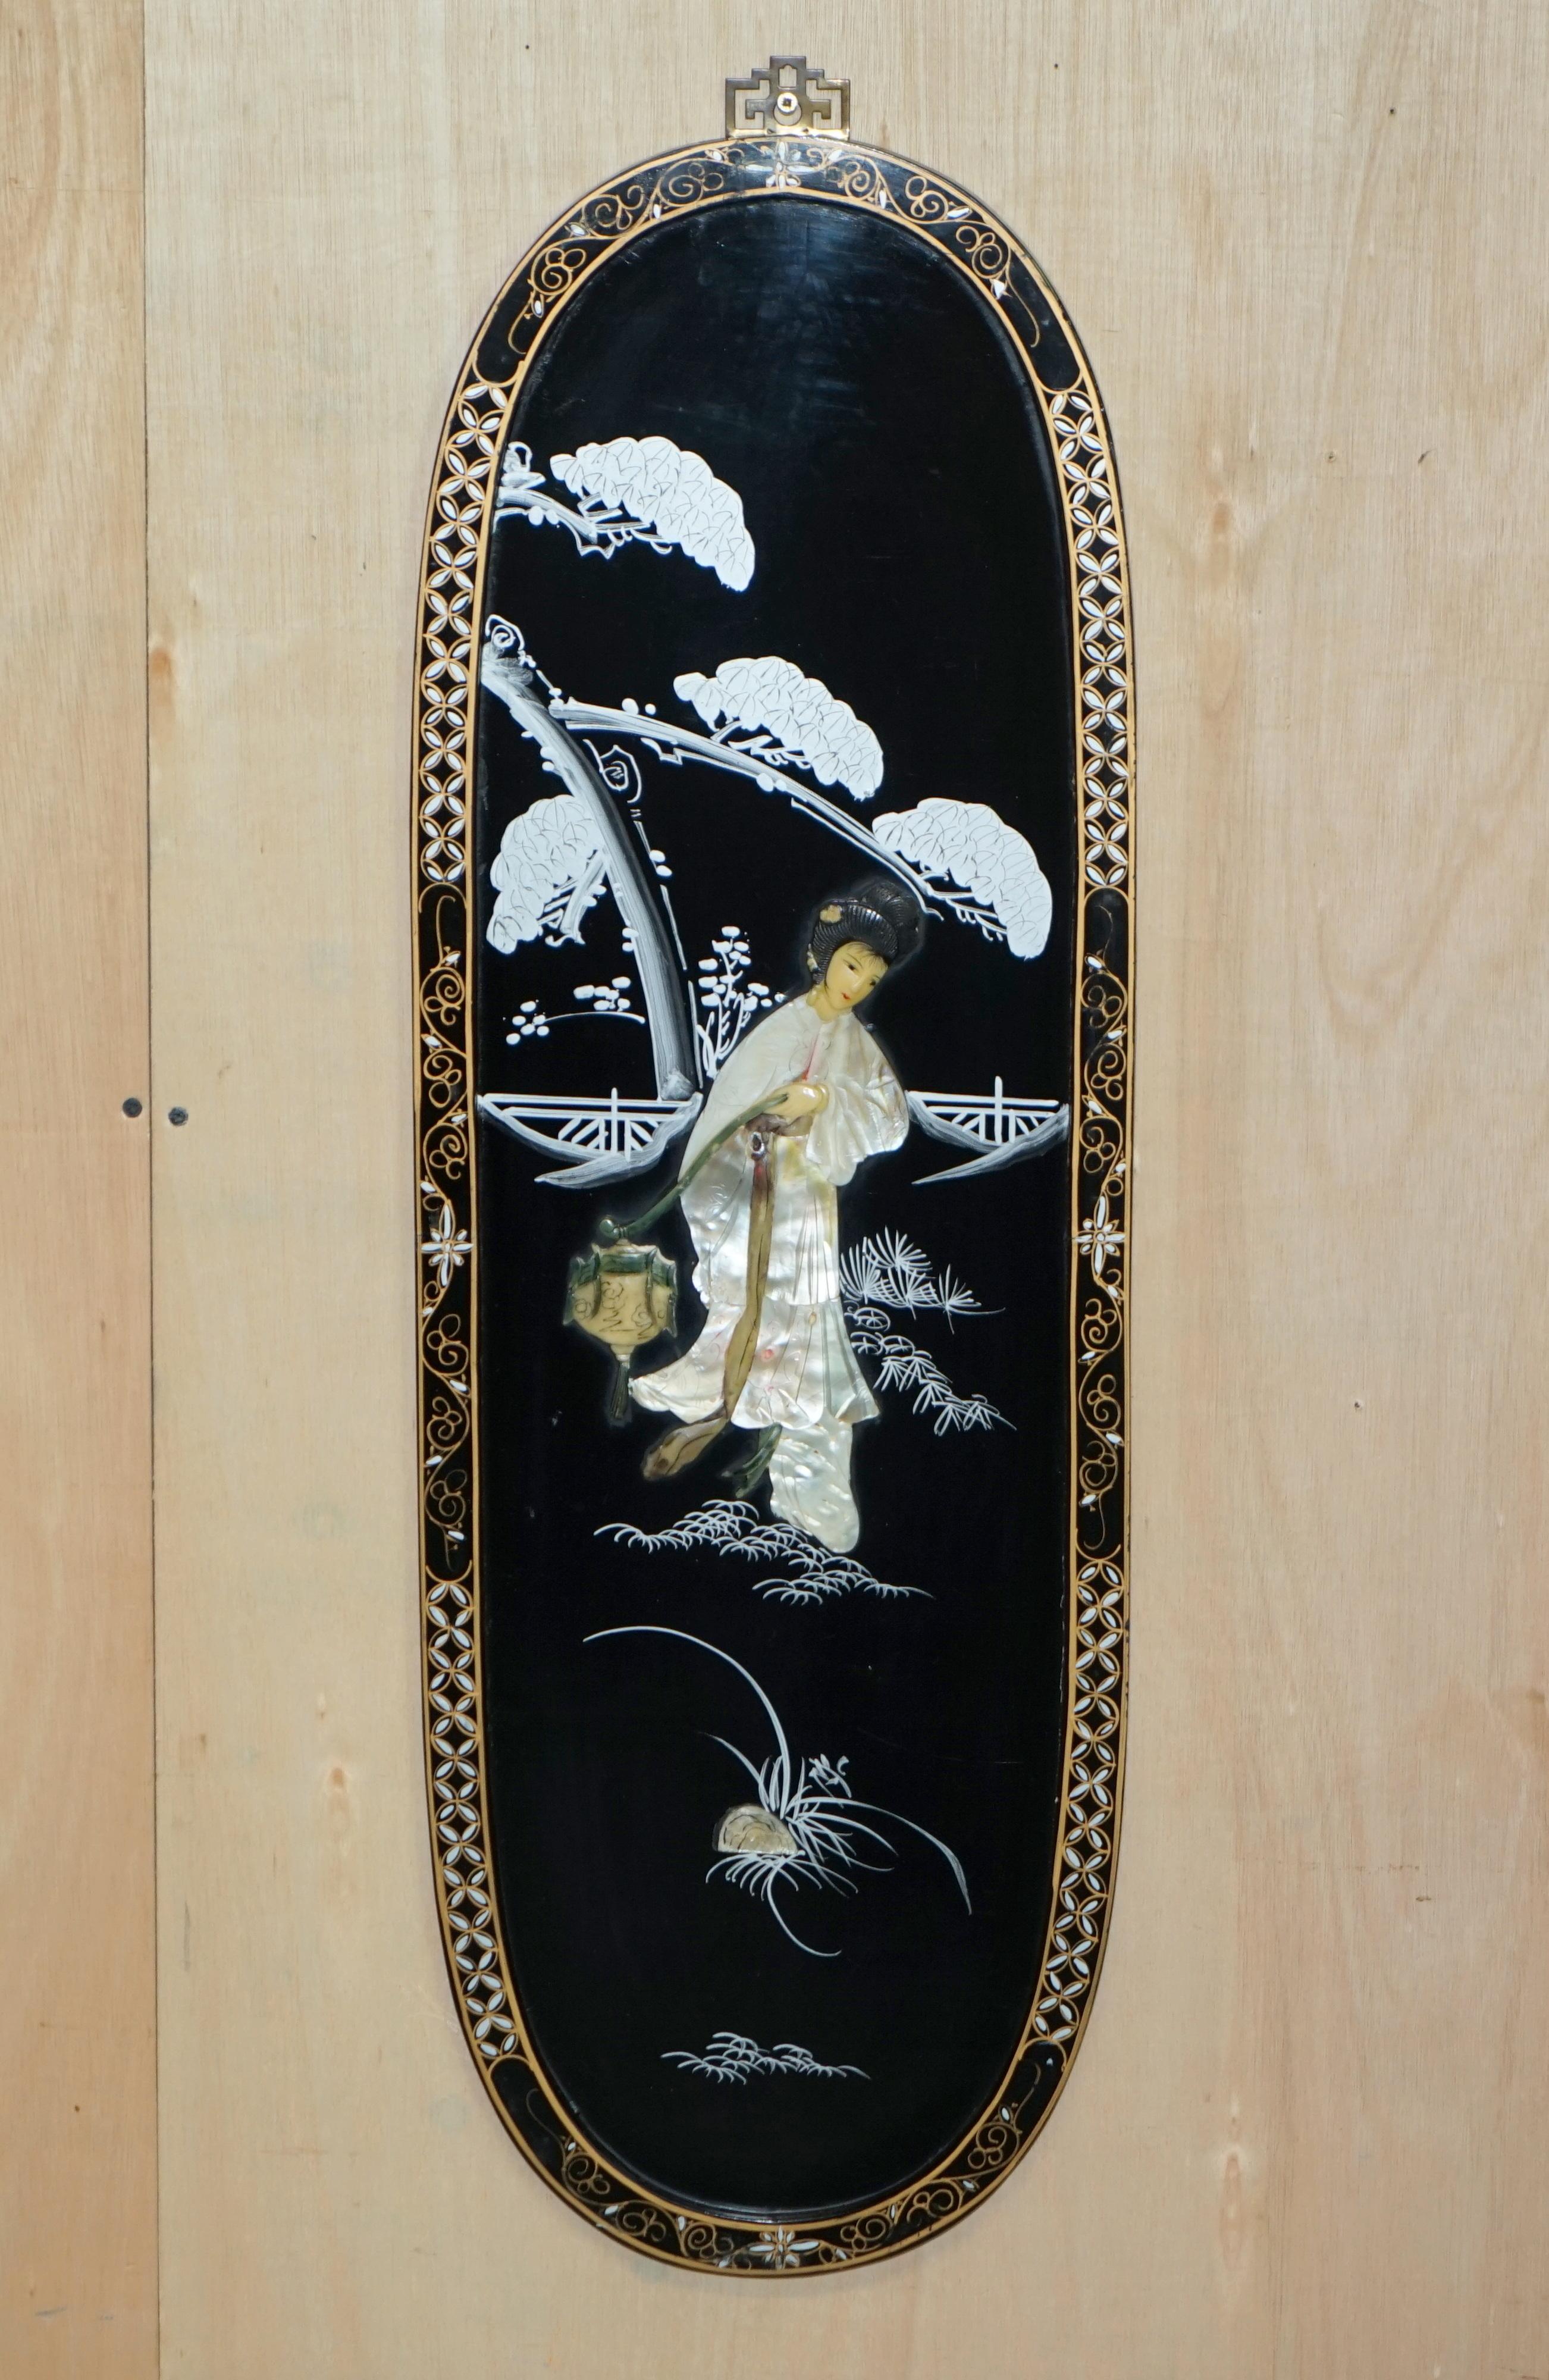 We are is delighted to offer for sale this stunning pair of vintage circa 1940s Chinese chinoiserie wall plaques depicting Geisha girls in soapstone and mother of pearl

Please note the delivery fee listed is just a guide, it covers within the M25